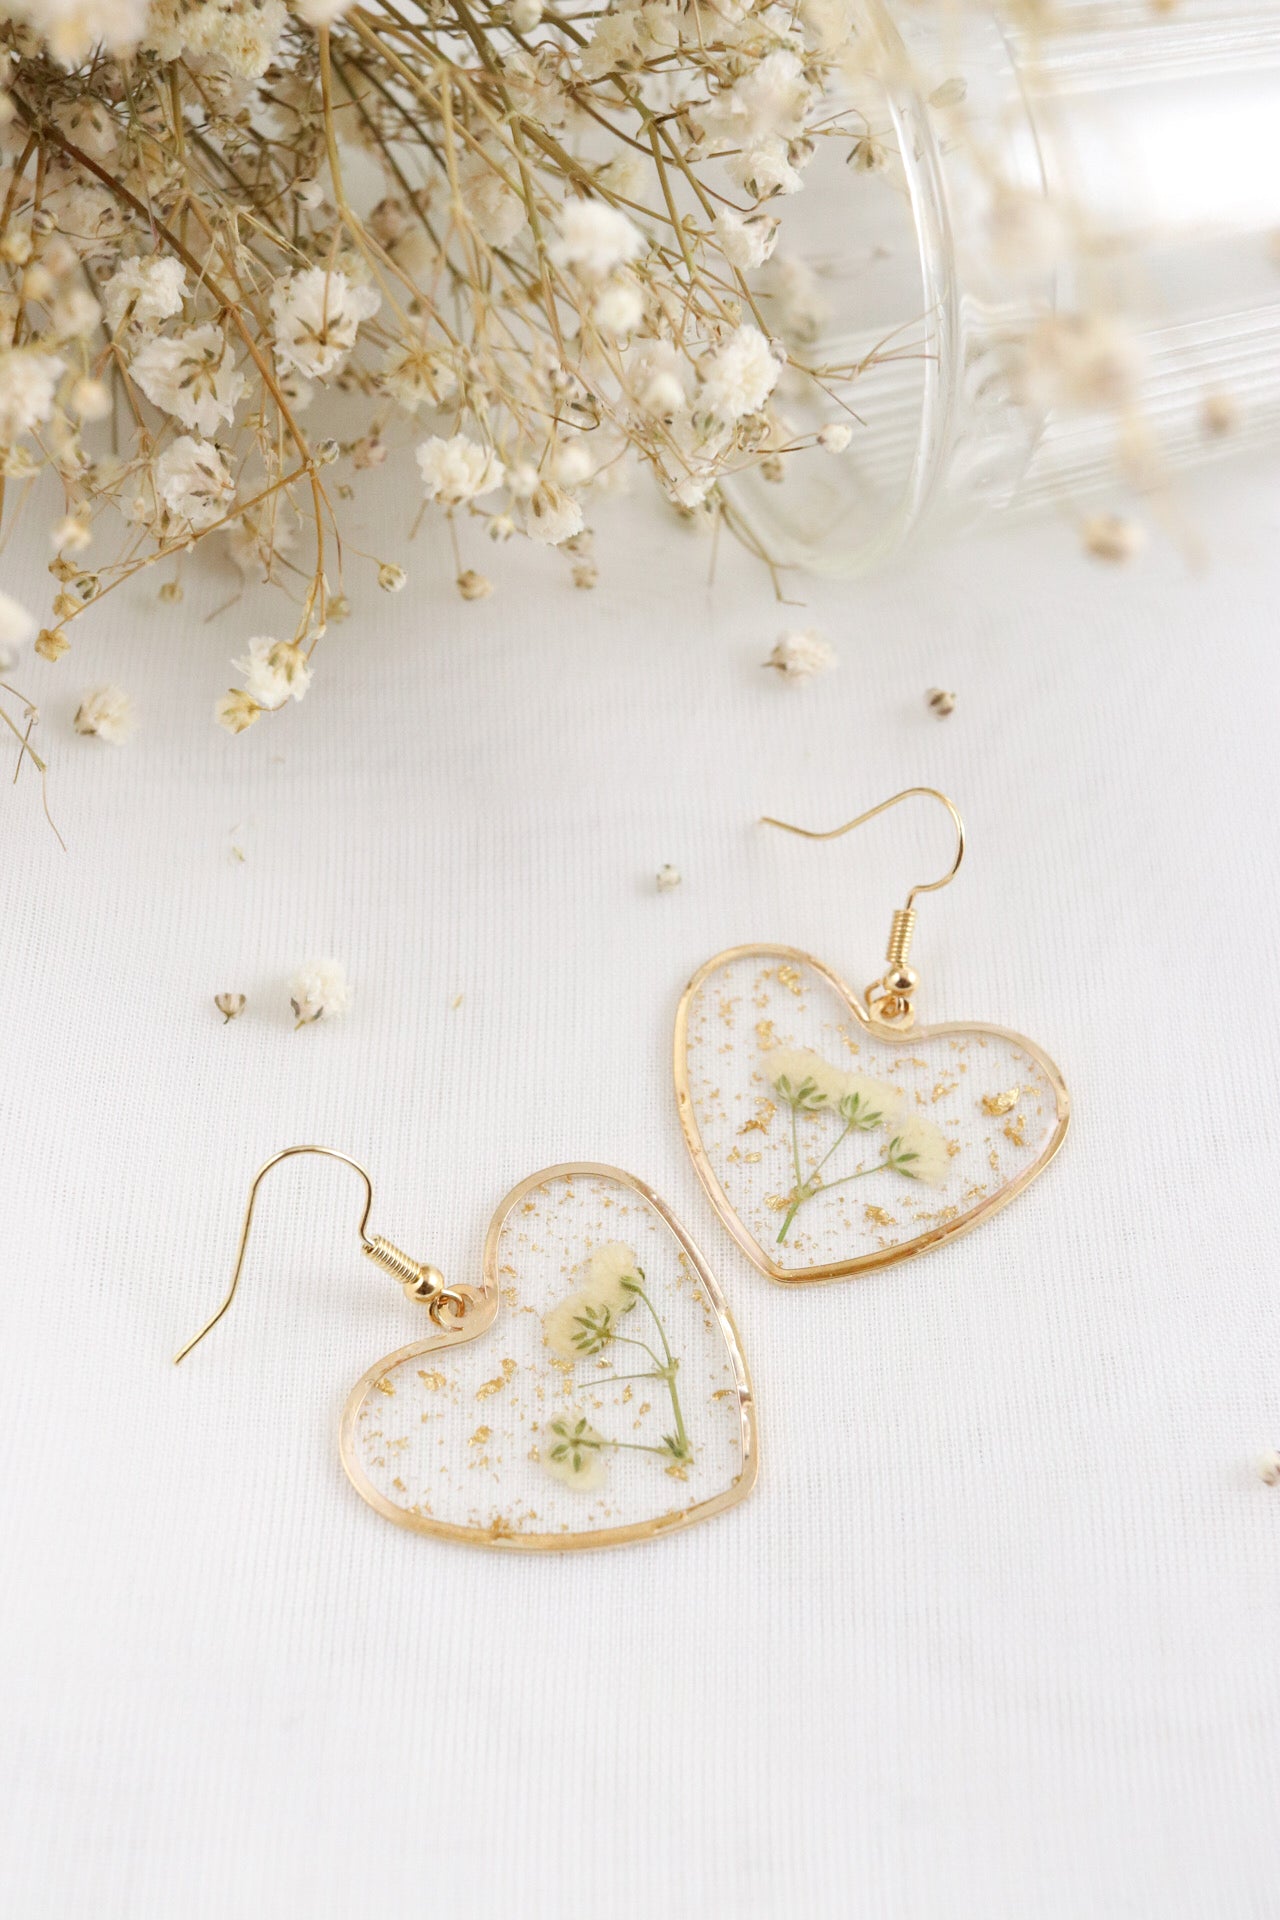 Baby's Breath Wildflower Heart Earrings, Real Pressed Flower Resin Earrings, Botanical Nature Jewelry, Holiday Gift For Her